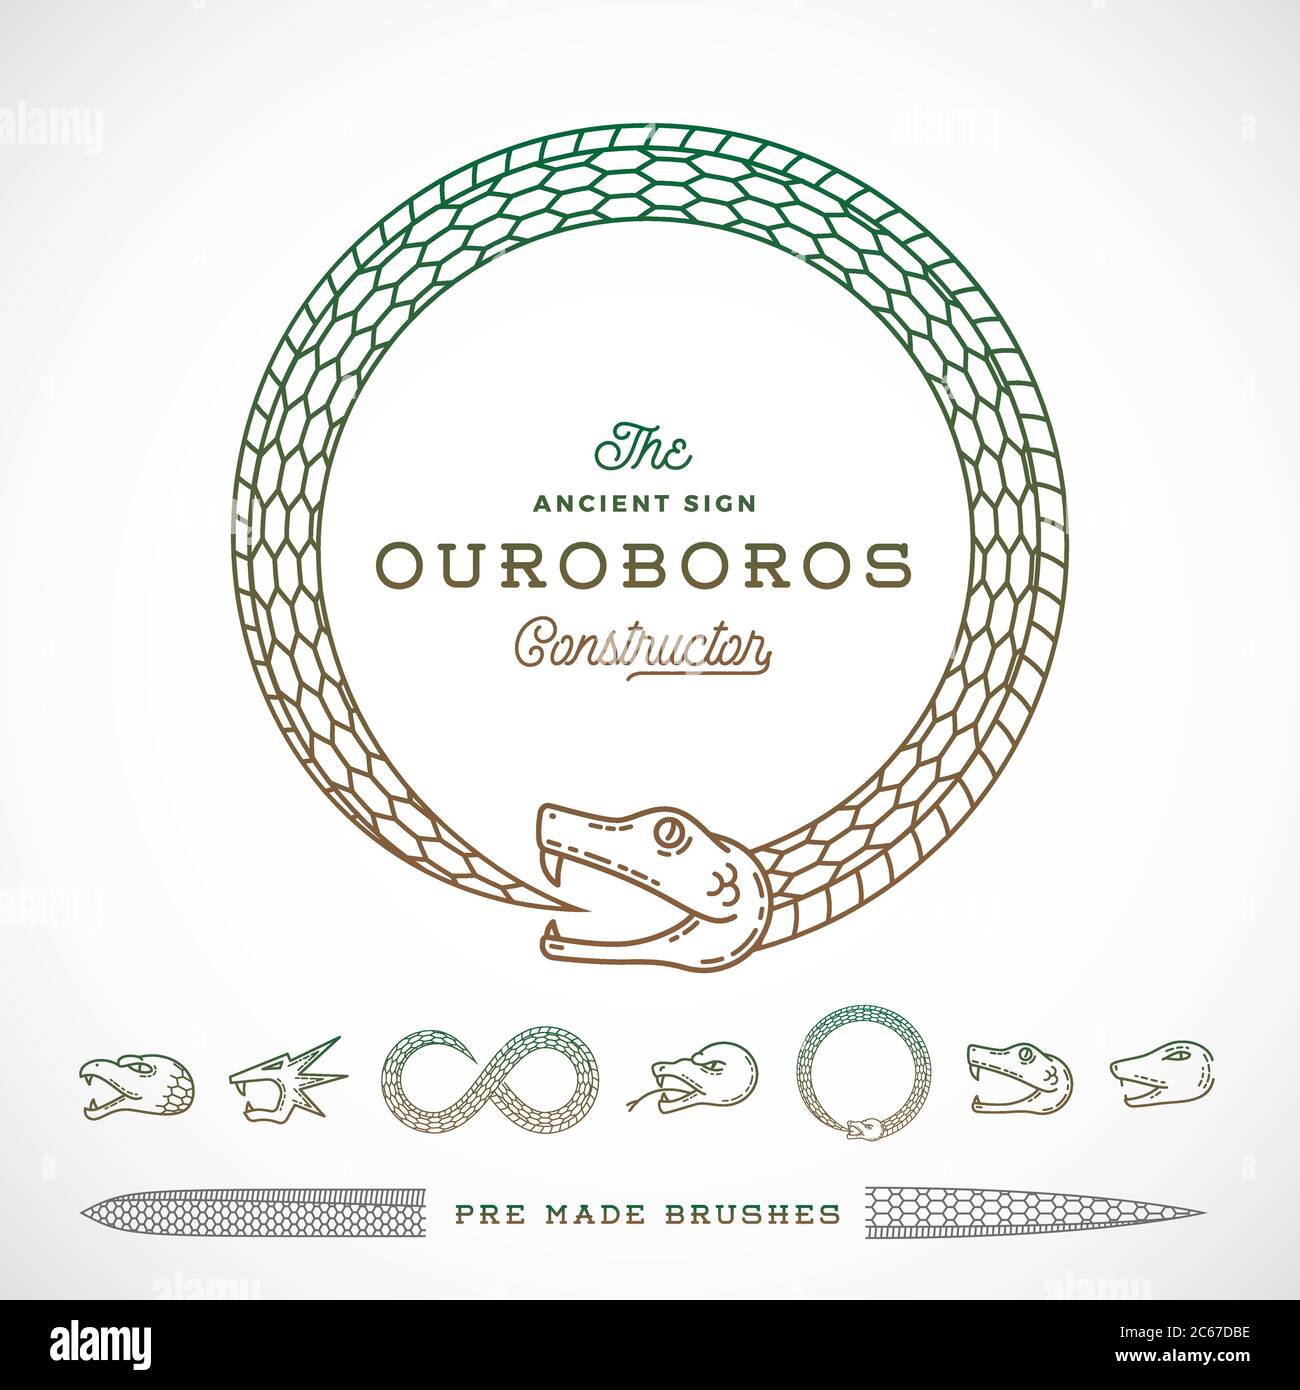 Abstract Vector Infinite Ouroboros Snake Symbol, Sign or a Logo Constructor in Line Style. Tails to make Brushes of Them. Five Different Heads and Two Stock Vector